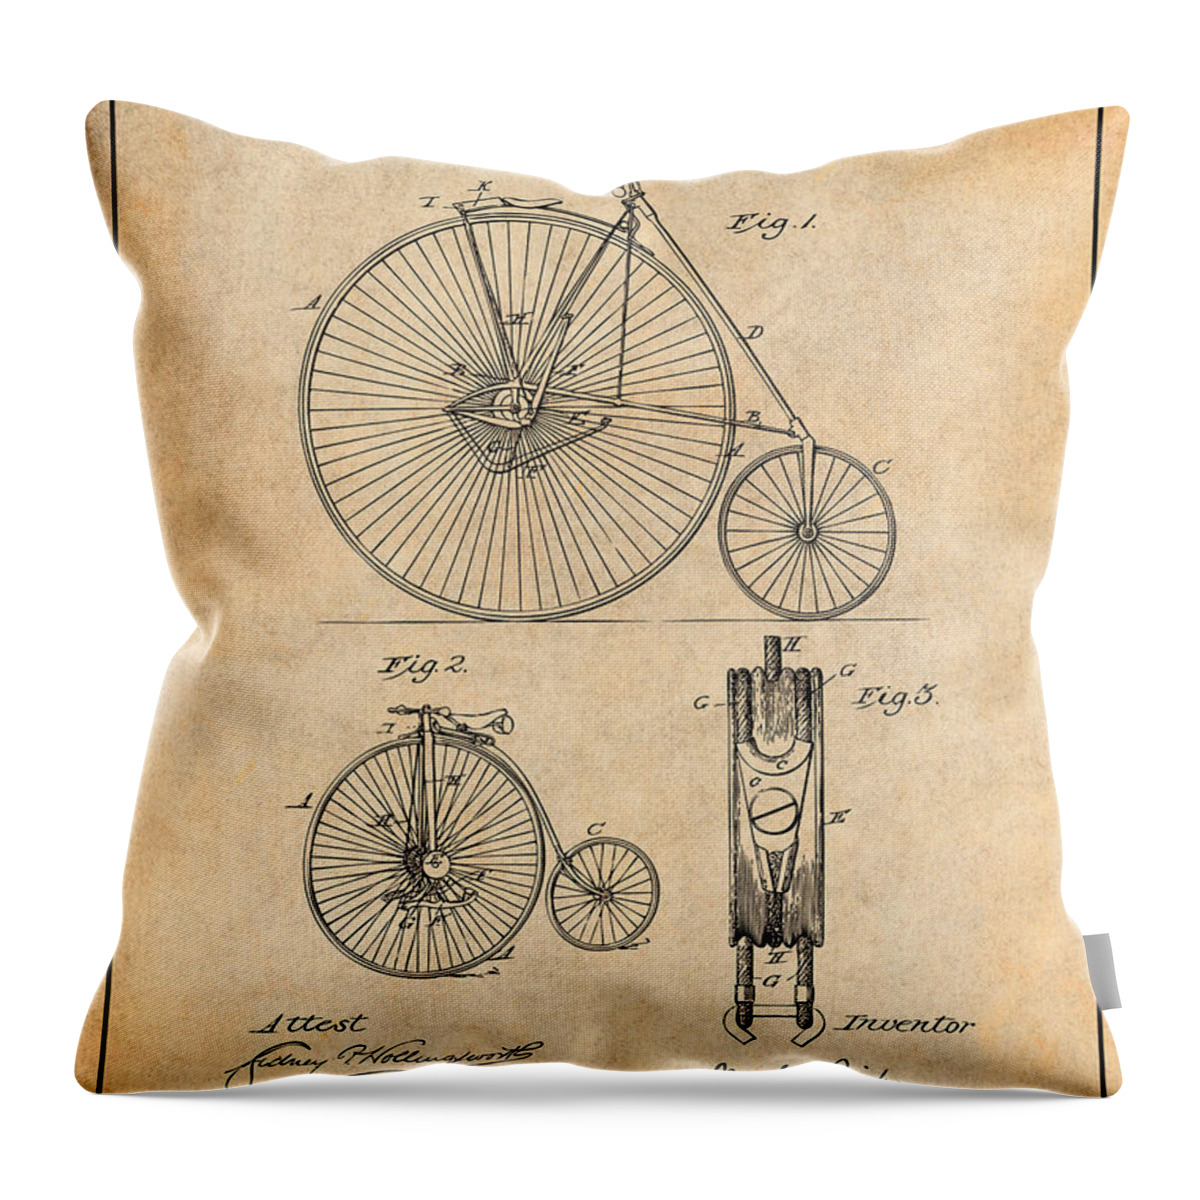 1886 W. G. Rich Velocipede Bicycle Patent Print Throw Pillow featuring the drawing 1886 W. G. Rich Velocipede Bicycle Antique Paper Patent Print by Greg Edwards